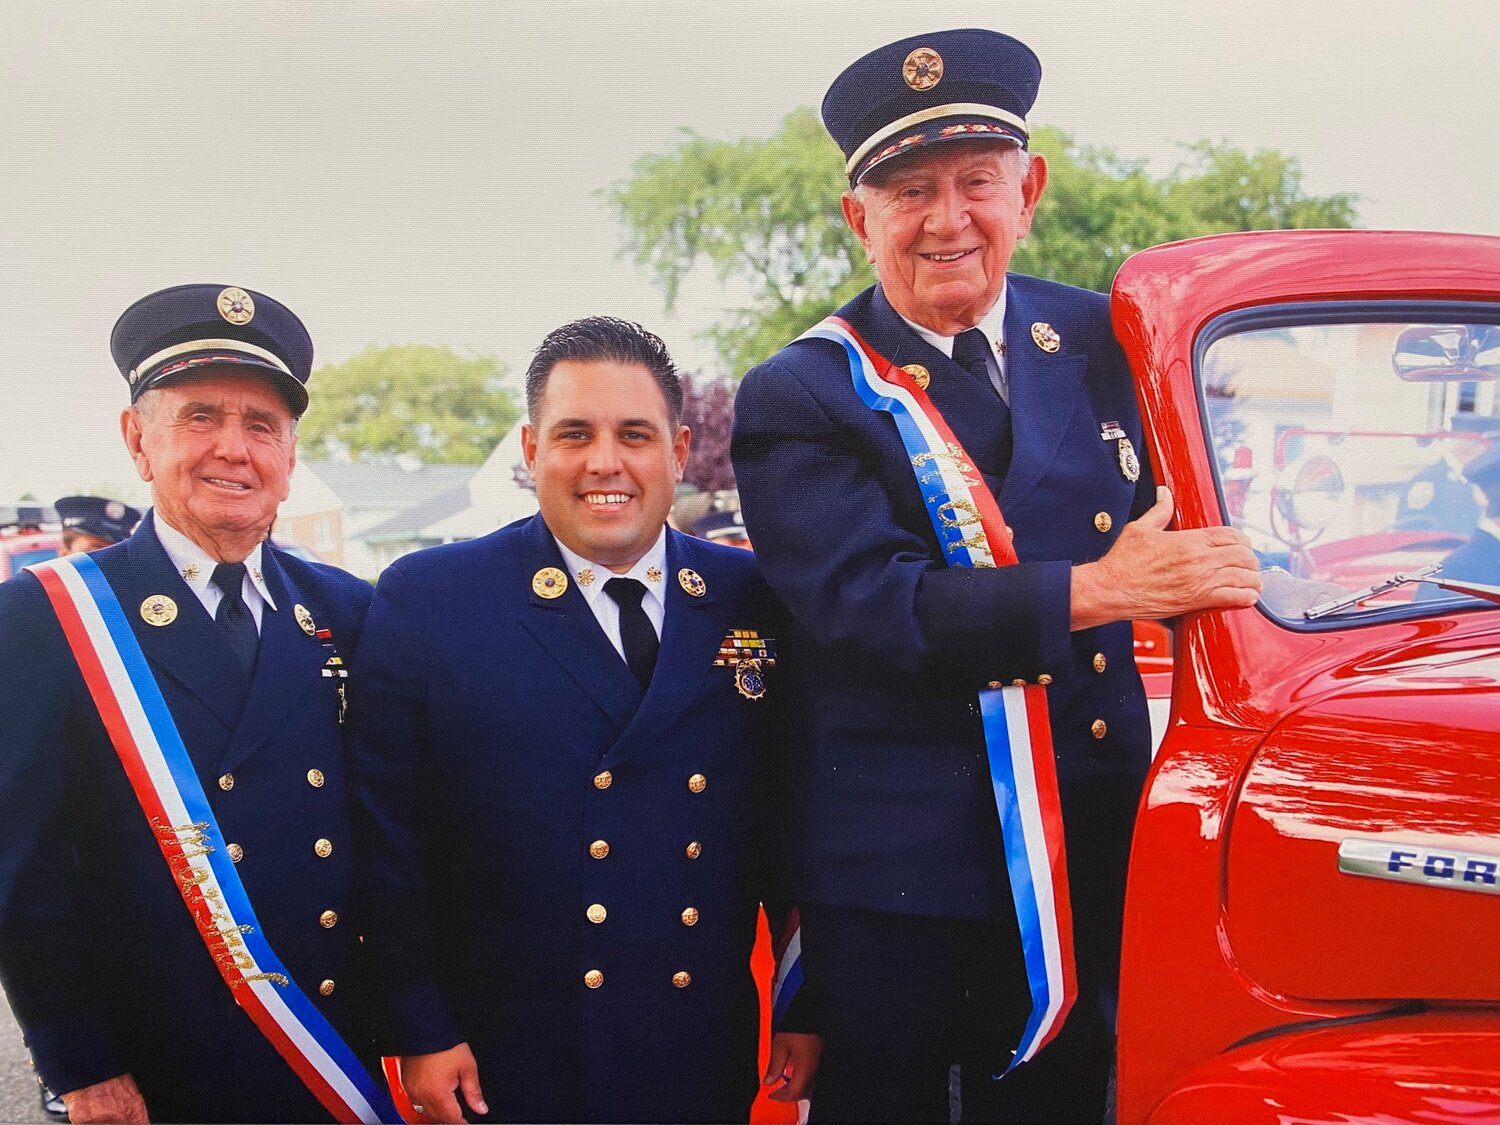 Francis ‘Red’ McGann, far left, U.S. Rep. Anthony D’Esposito and Edward ‘Doc’ McGann at this year’s Memorial Day Parade in Island Park.